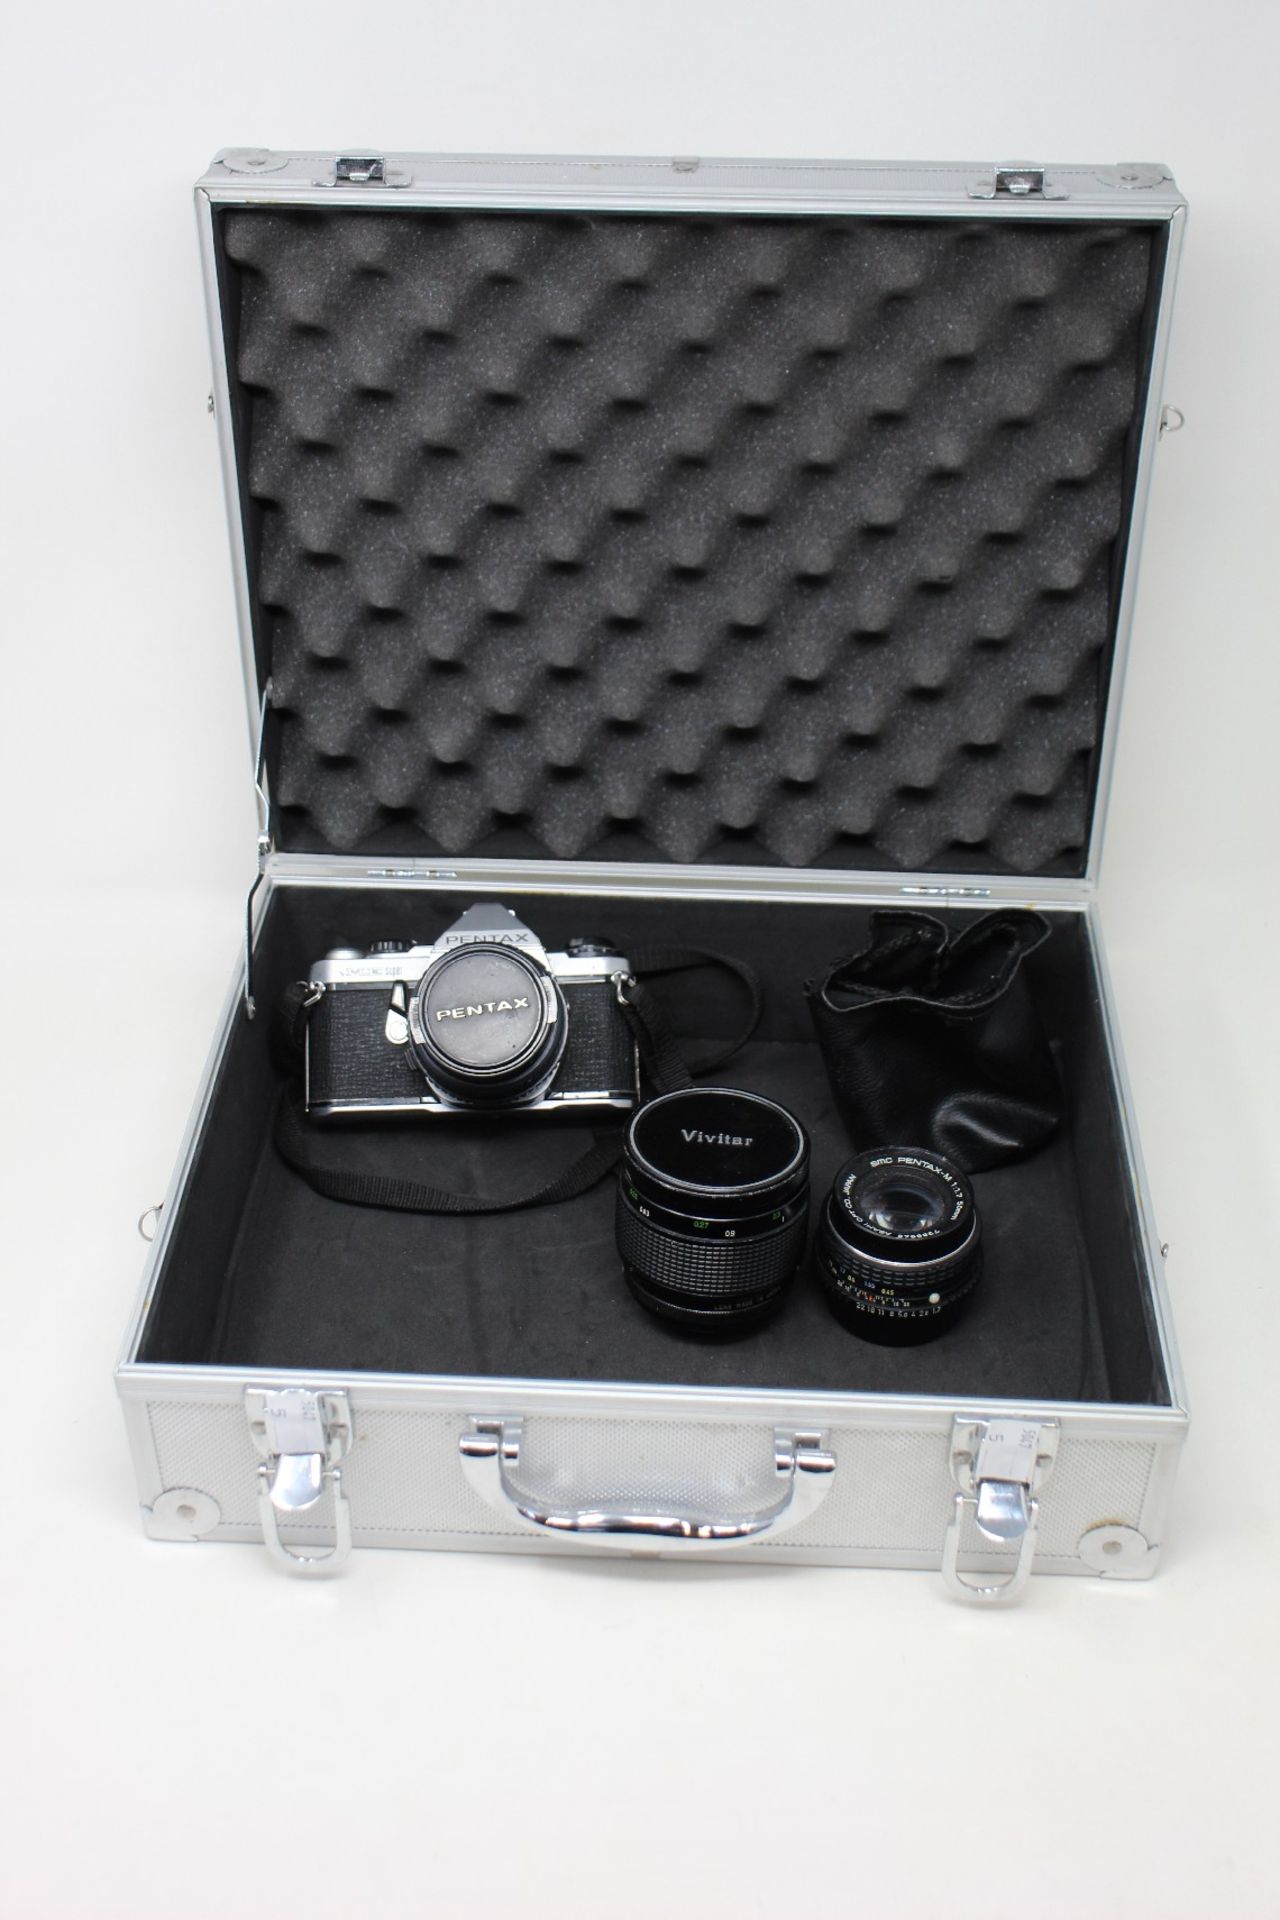 A pre-owned Pantex ME Super 35mm camera with two Pantex lenses and a Vivitar lens with a hard case.